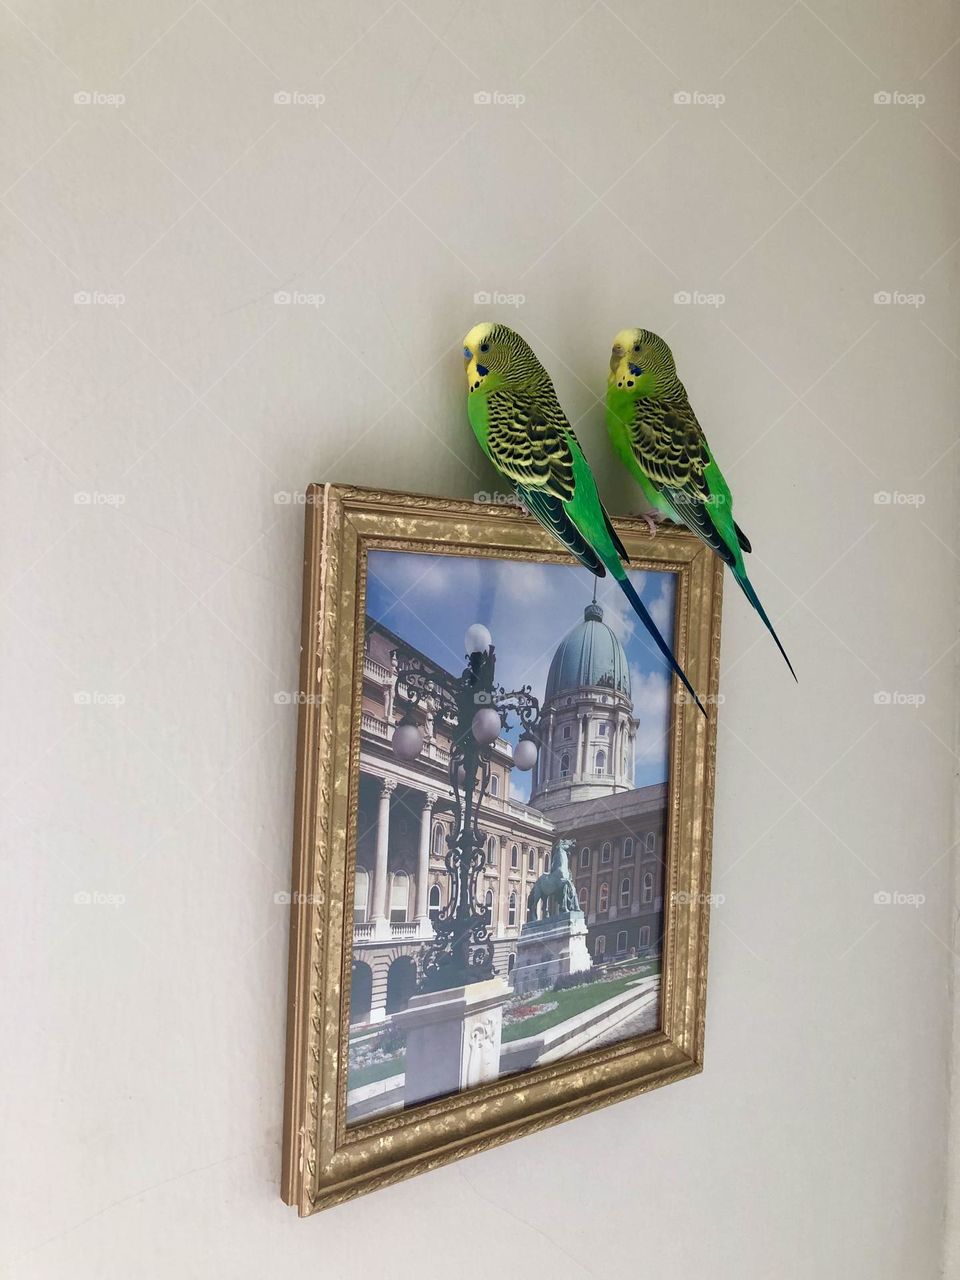 Kiwi and. Coco family pet sitting on the picture frame 🖼